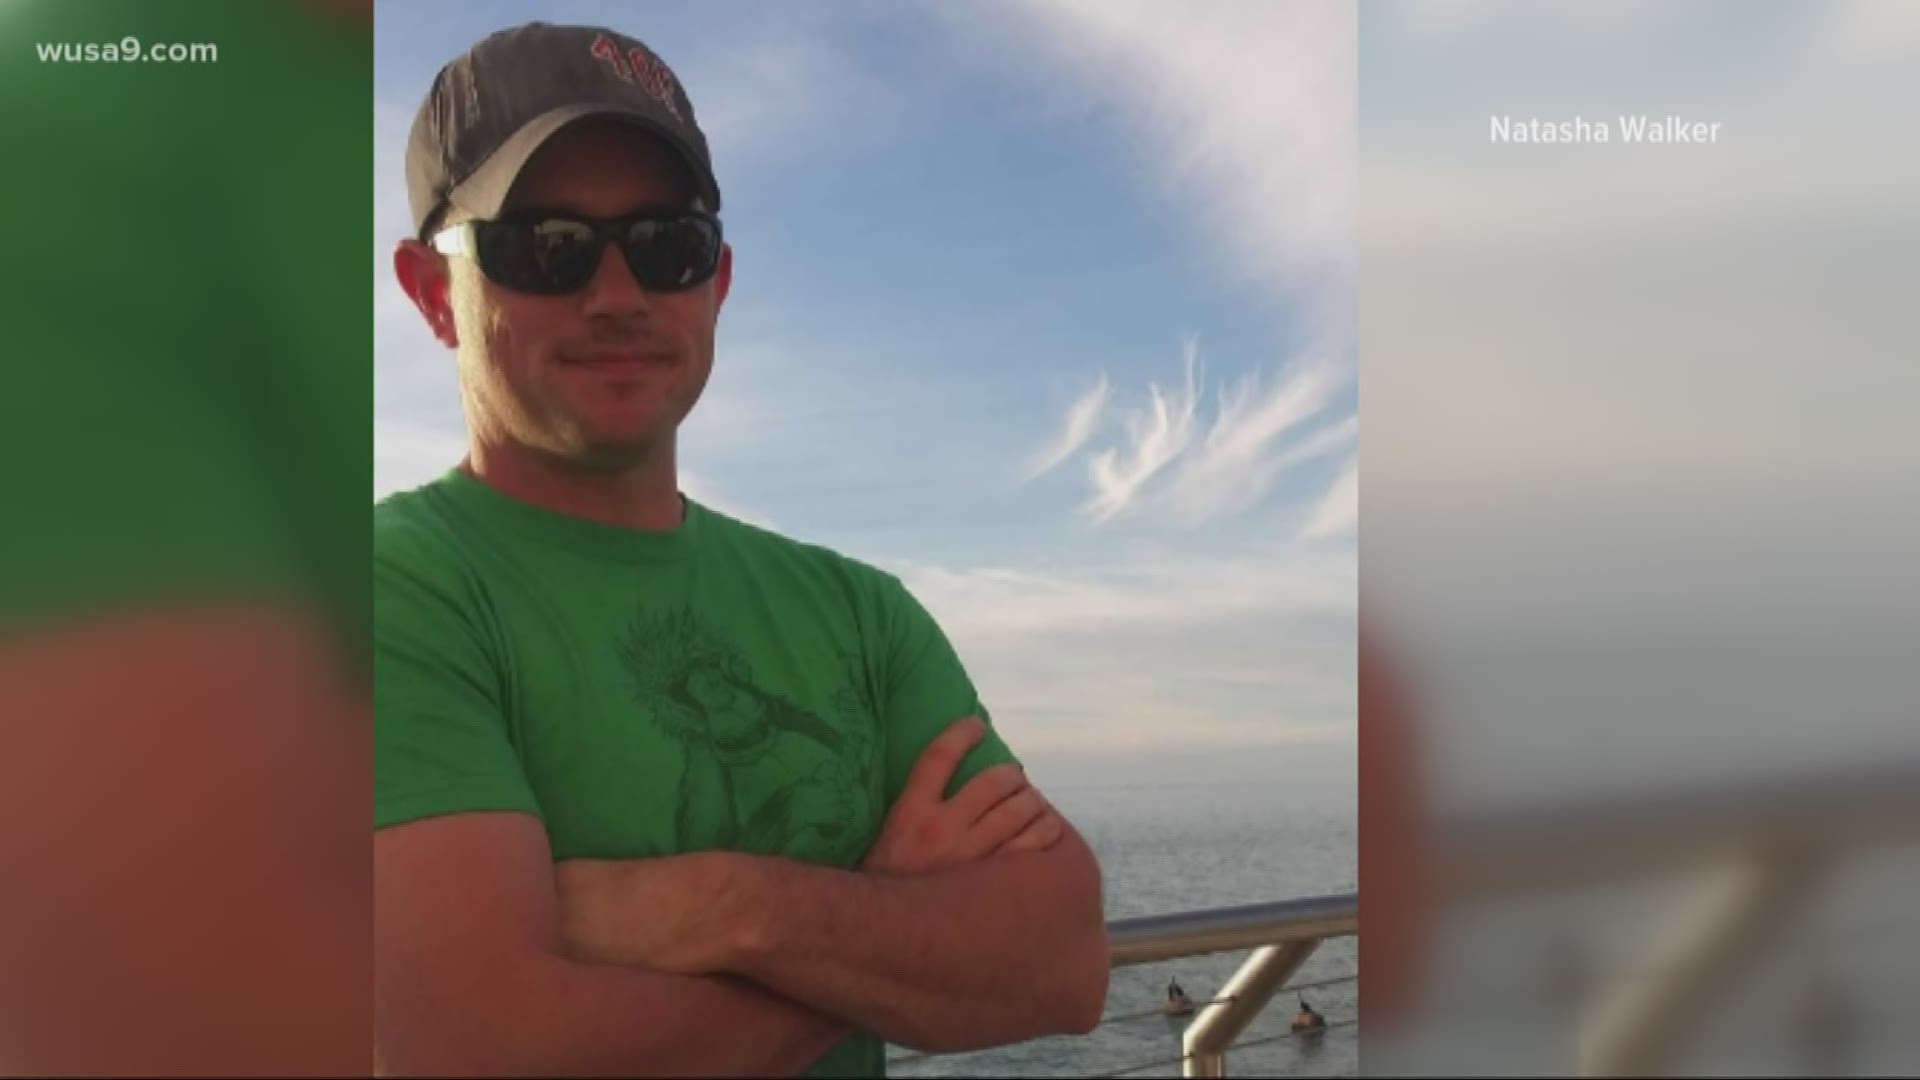 A local firefighter goes missing off the coast of Florida. Fairfax County Firefighter Justin Walker and a friend were last seen Friday as they made their way down a boat ramp in Port Canaveral. They were supposed to return from a fishing trip later that evening but never made it.